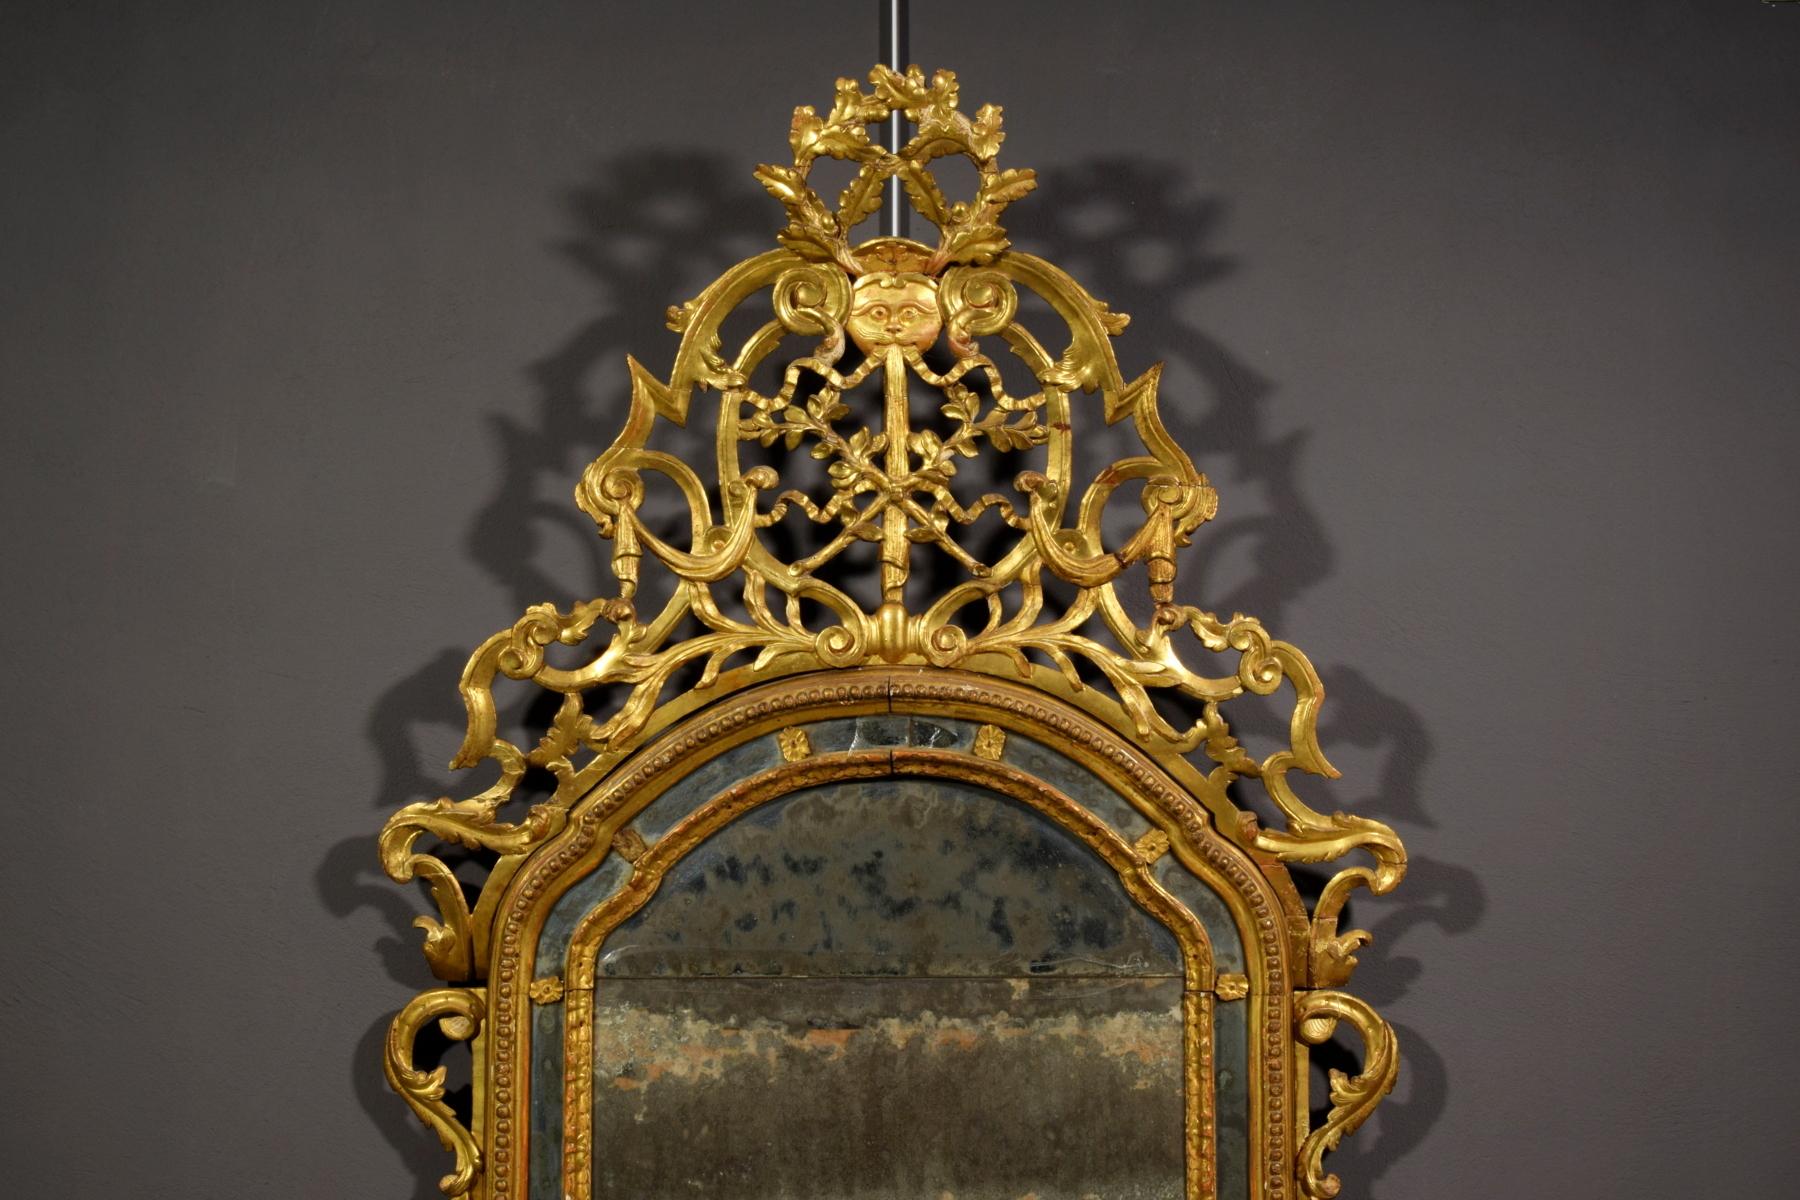 18th century, Italian carved and giltwood mirror
Measurements: cm H 225 x W max 112 x D 6 (maximum depth 20)

Important mirror made in Turin, north of Italy, in the second half of the 18th century in finely carved and gilded wood.
The mirror has